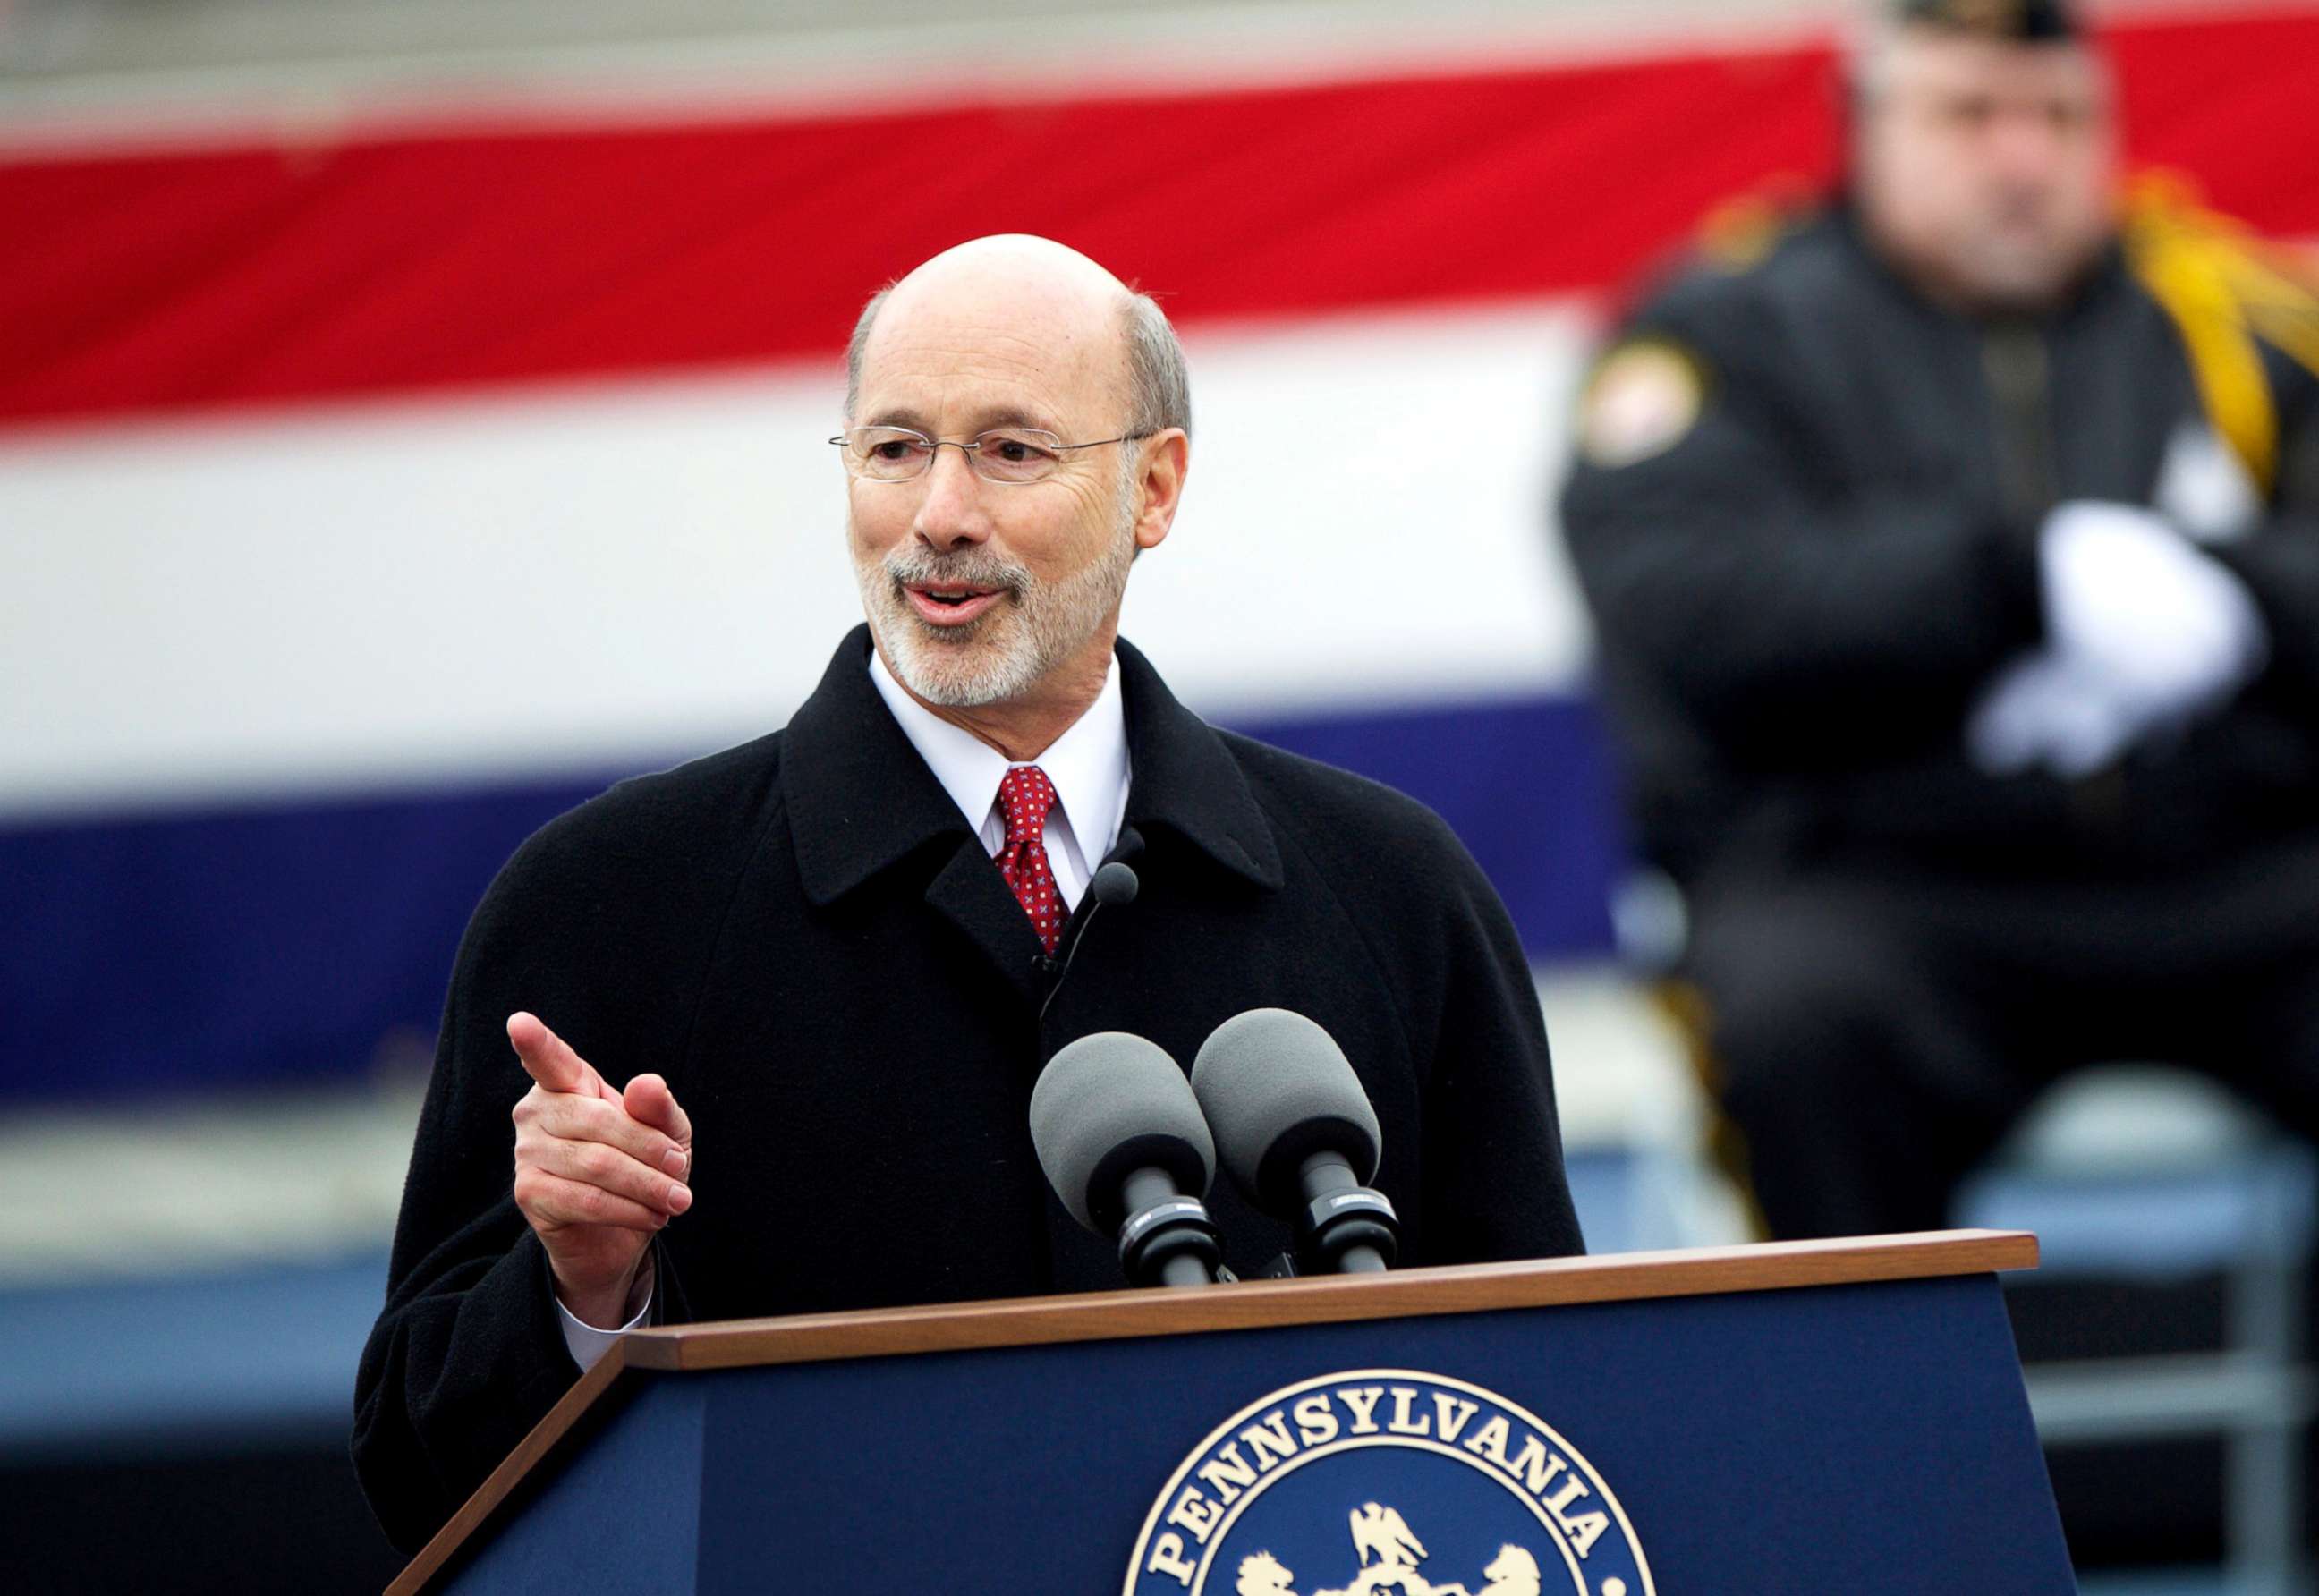 PHOTO: Tom Wolf delivers a speech after being sworn in as the 47th Governor of Pennsylvania during an inauguration at the State Capitol in Harrisburg, Penn., Jan. 20, 2015.